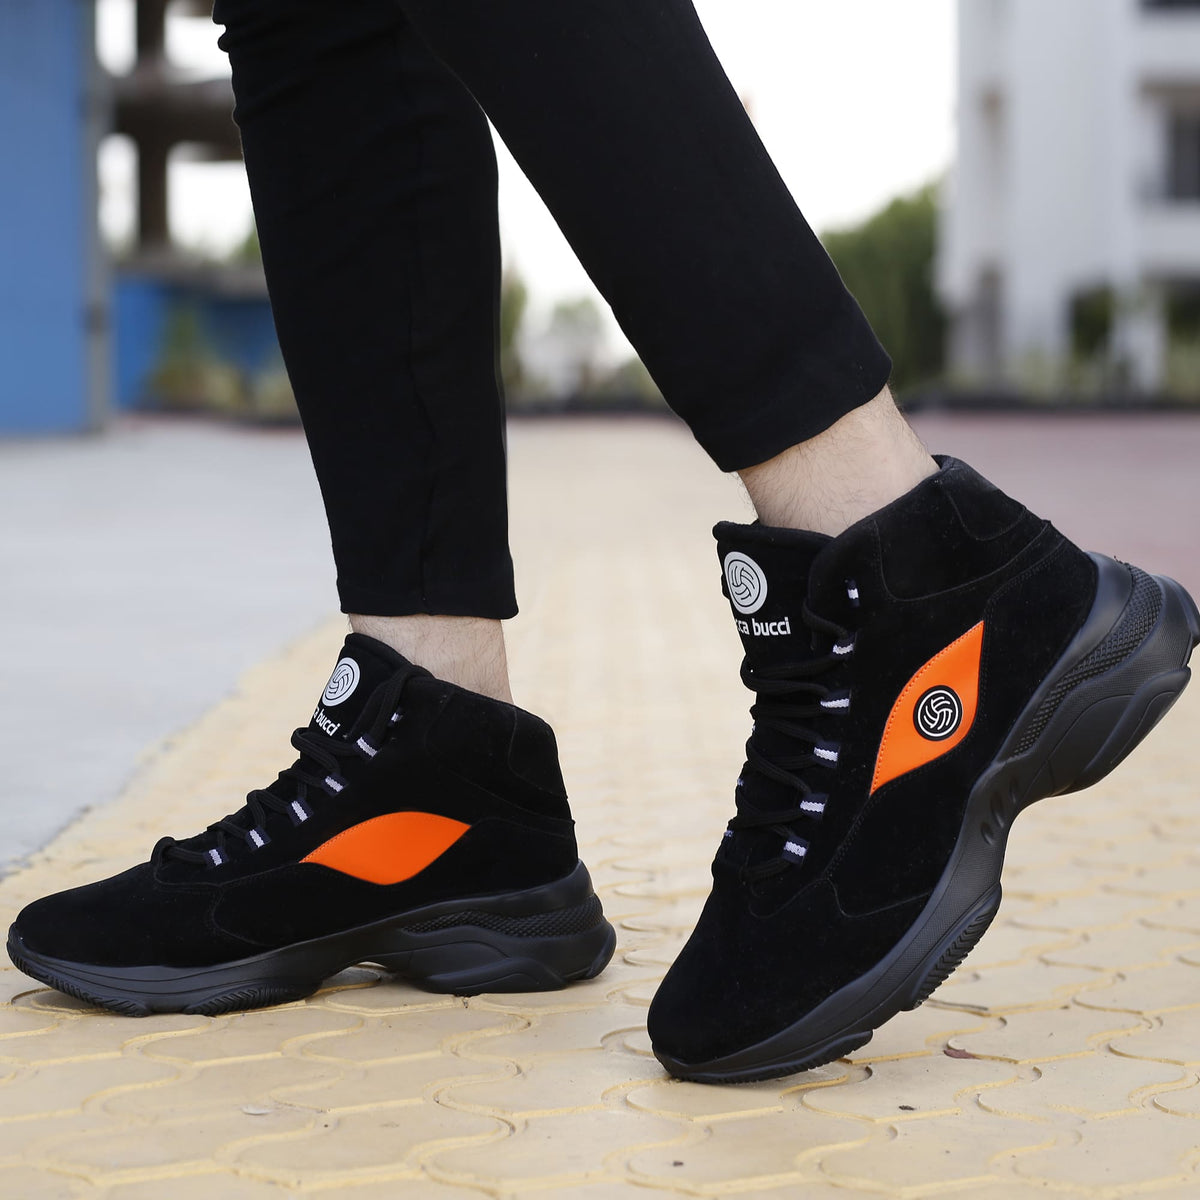 high ankle sneakers for men, mid ankle sneakers, casual shoes for men, ankle shoes for men, ankle shoes, black high tops